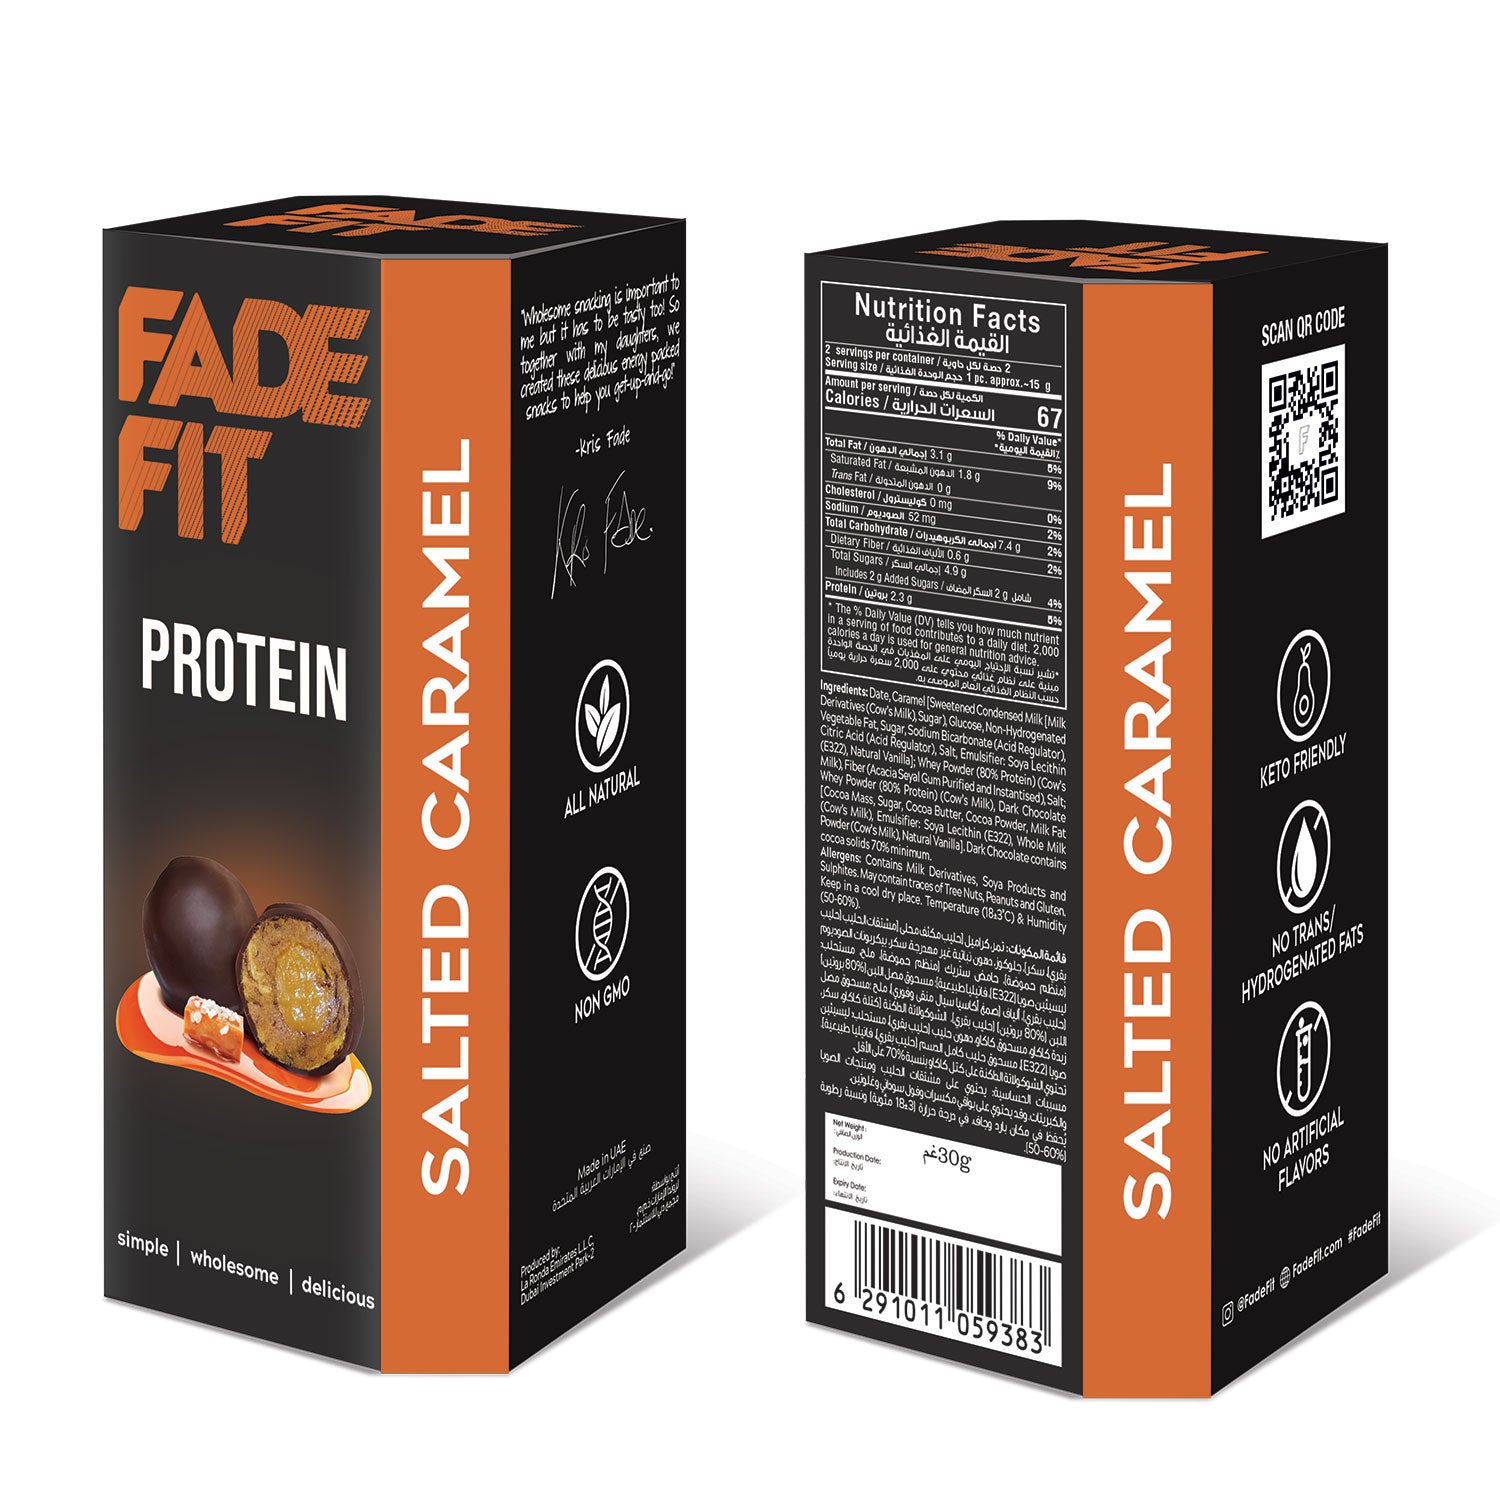 FADE FIT Salted Caramel Protein, 30g